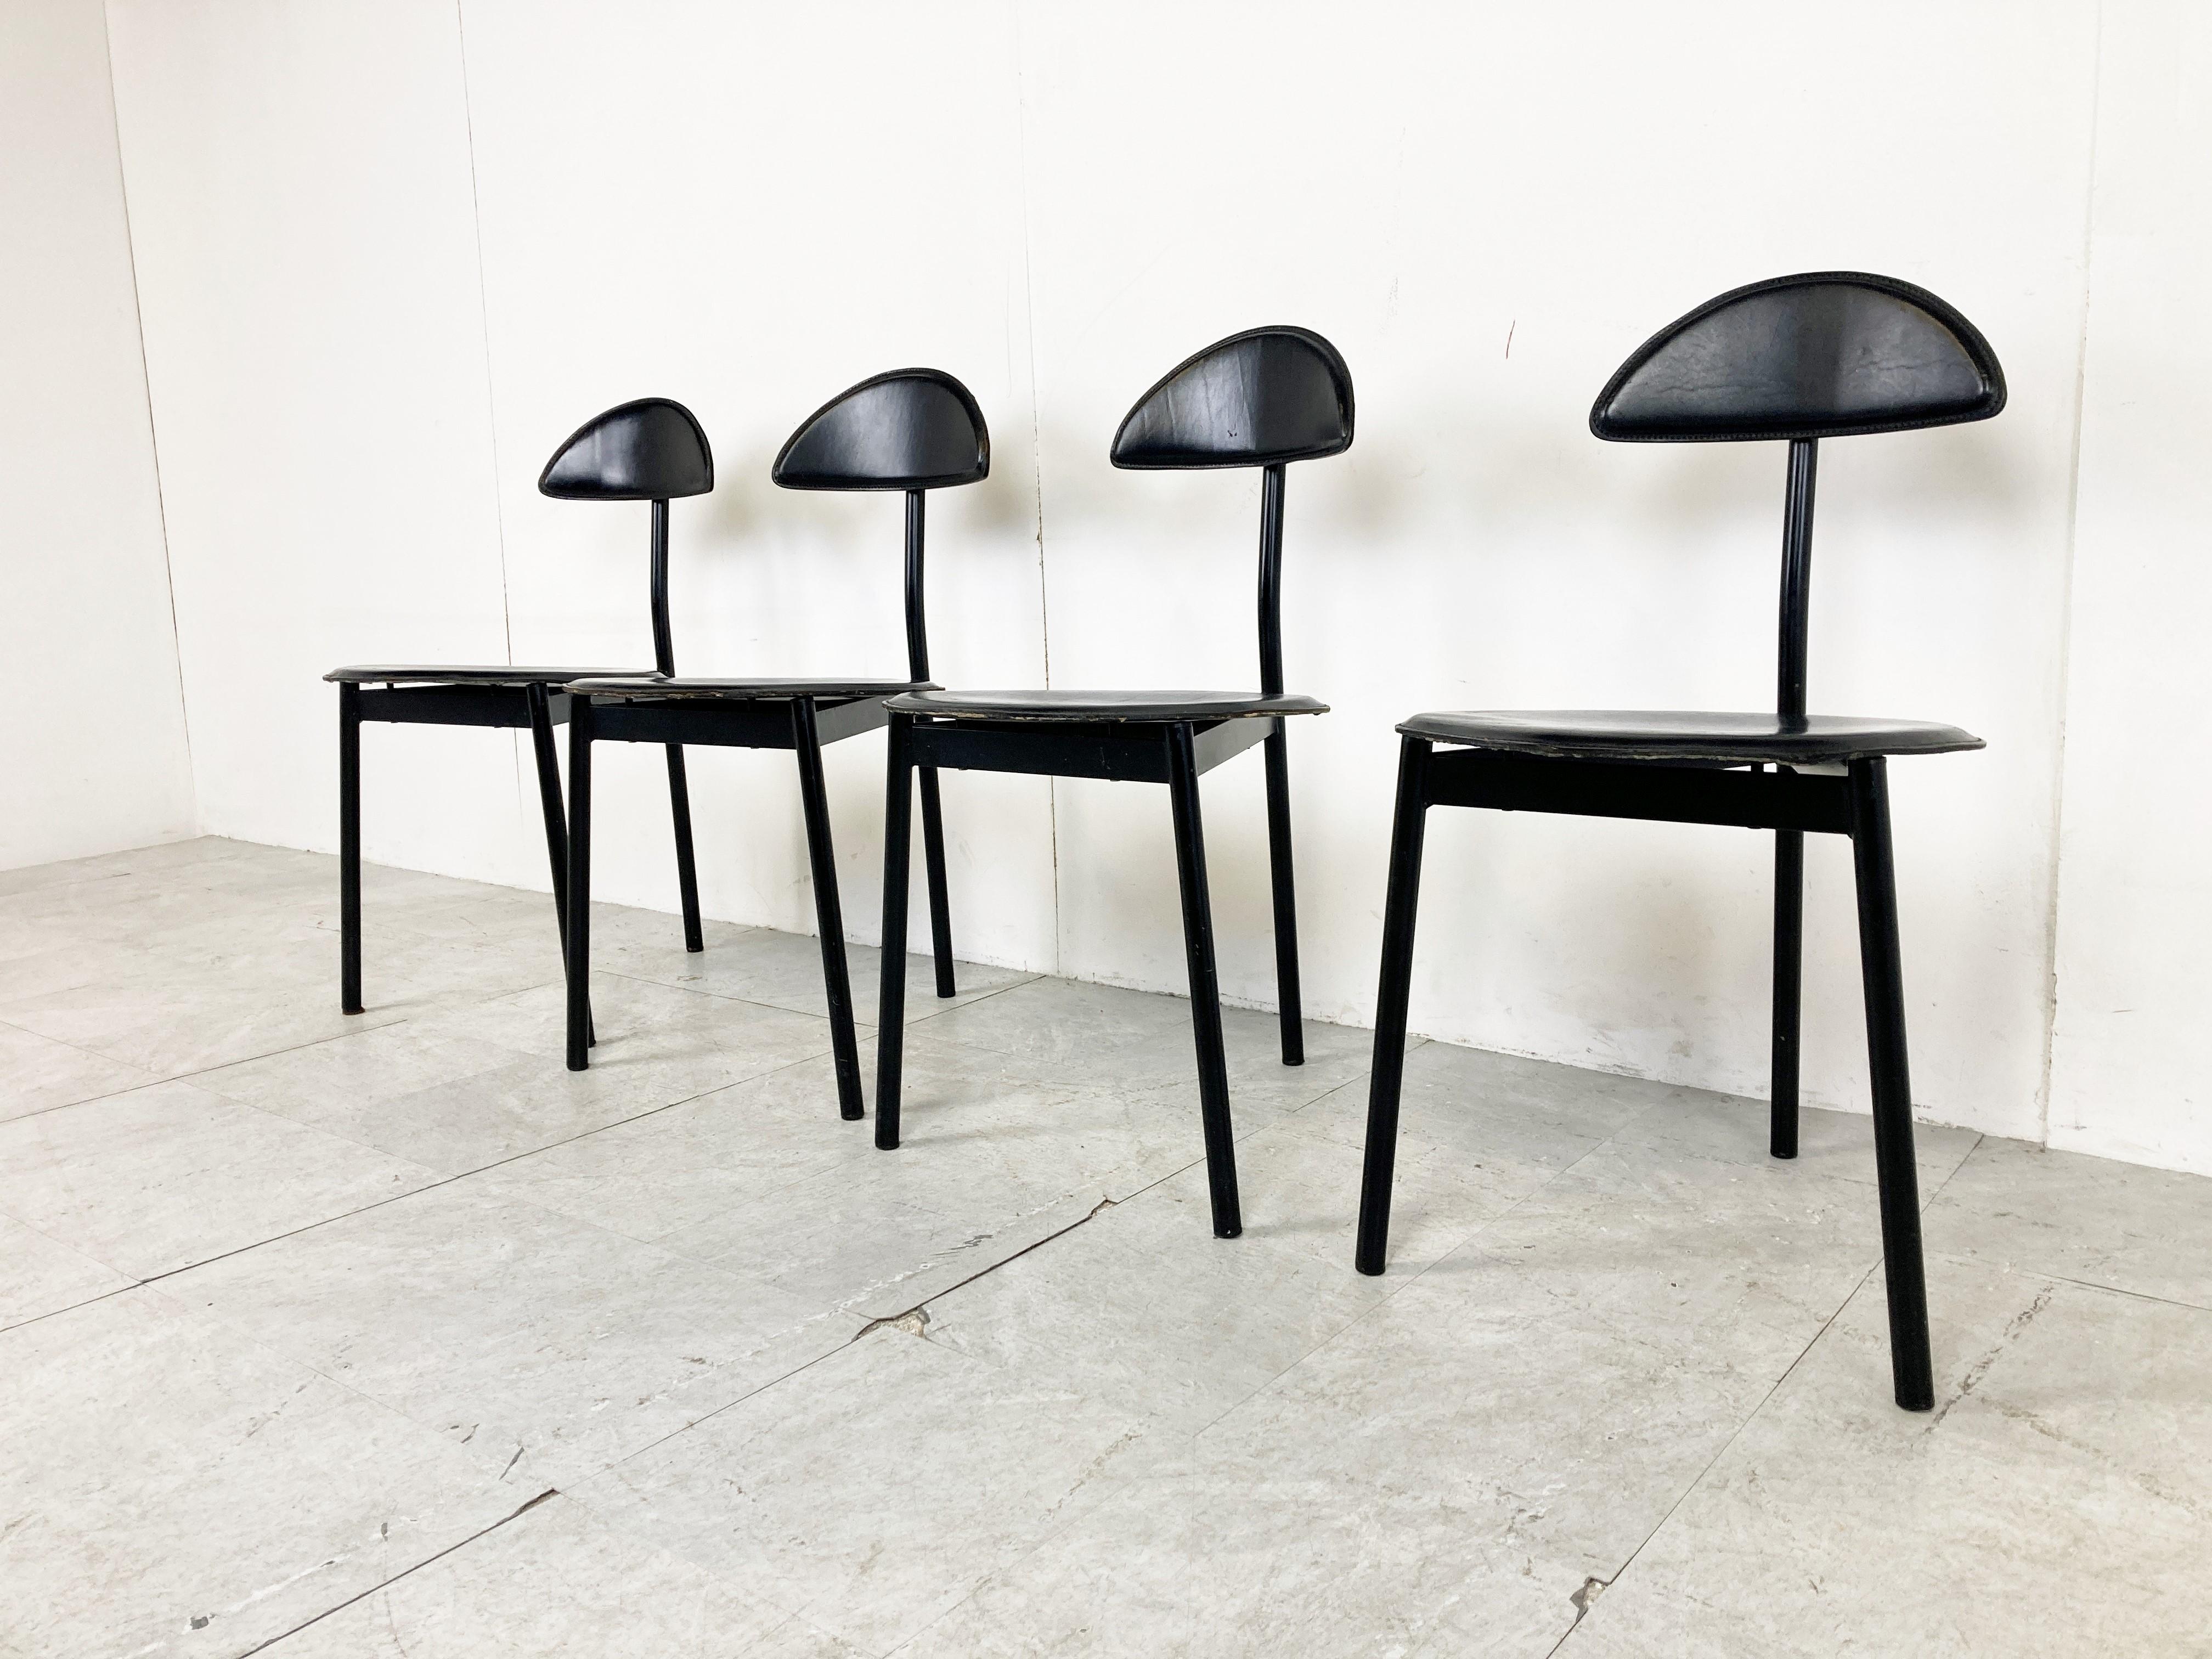 Italian Set of 4 Post Modern Dining Chairs by Linea Veam, 1980s For Sale